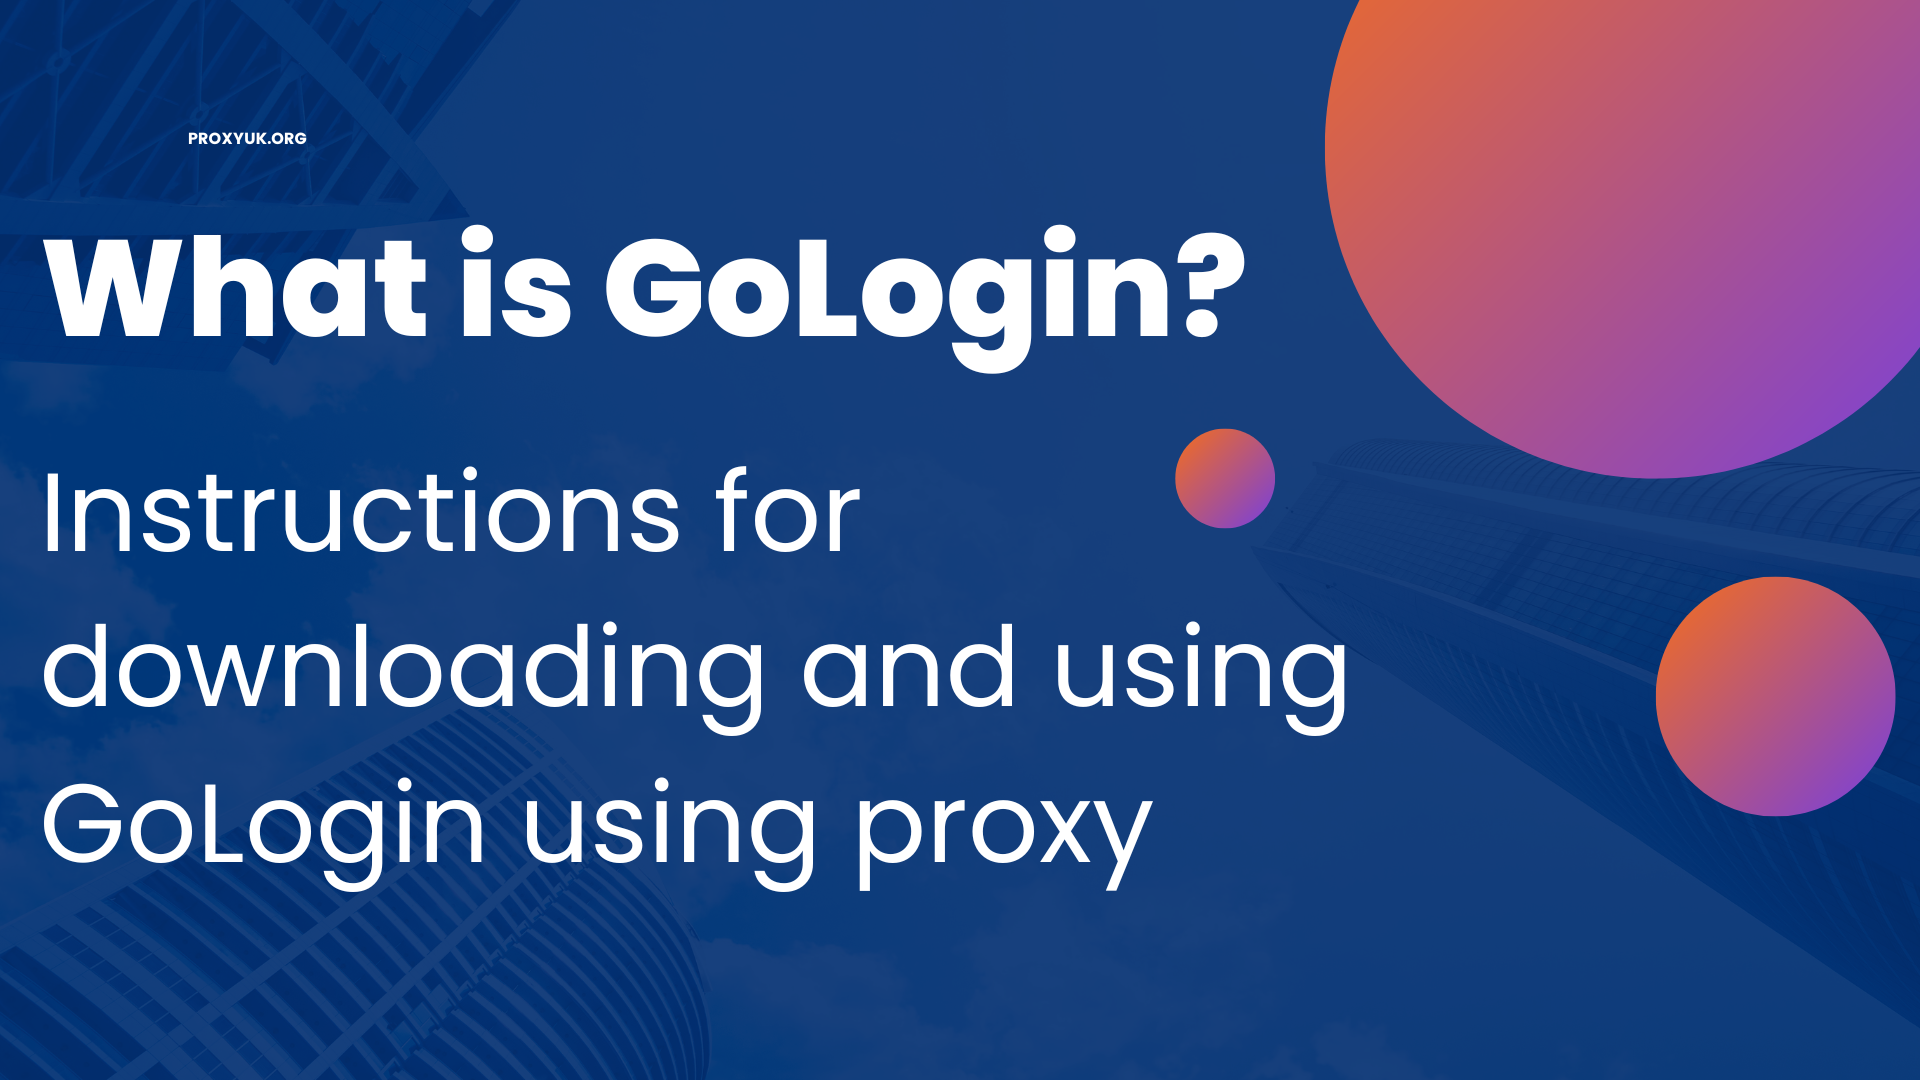 What is GoLogin? Instructions for downloading and using GoLogin using proxy